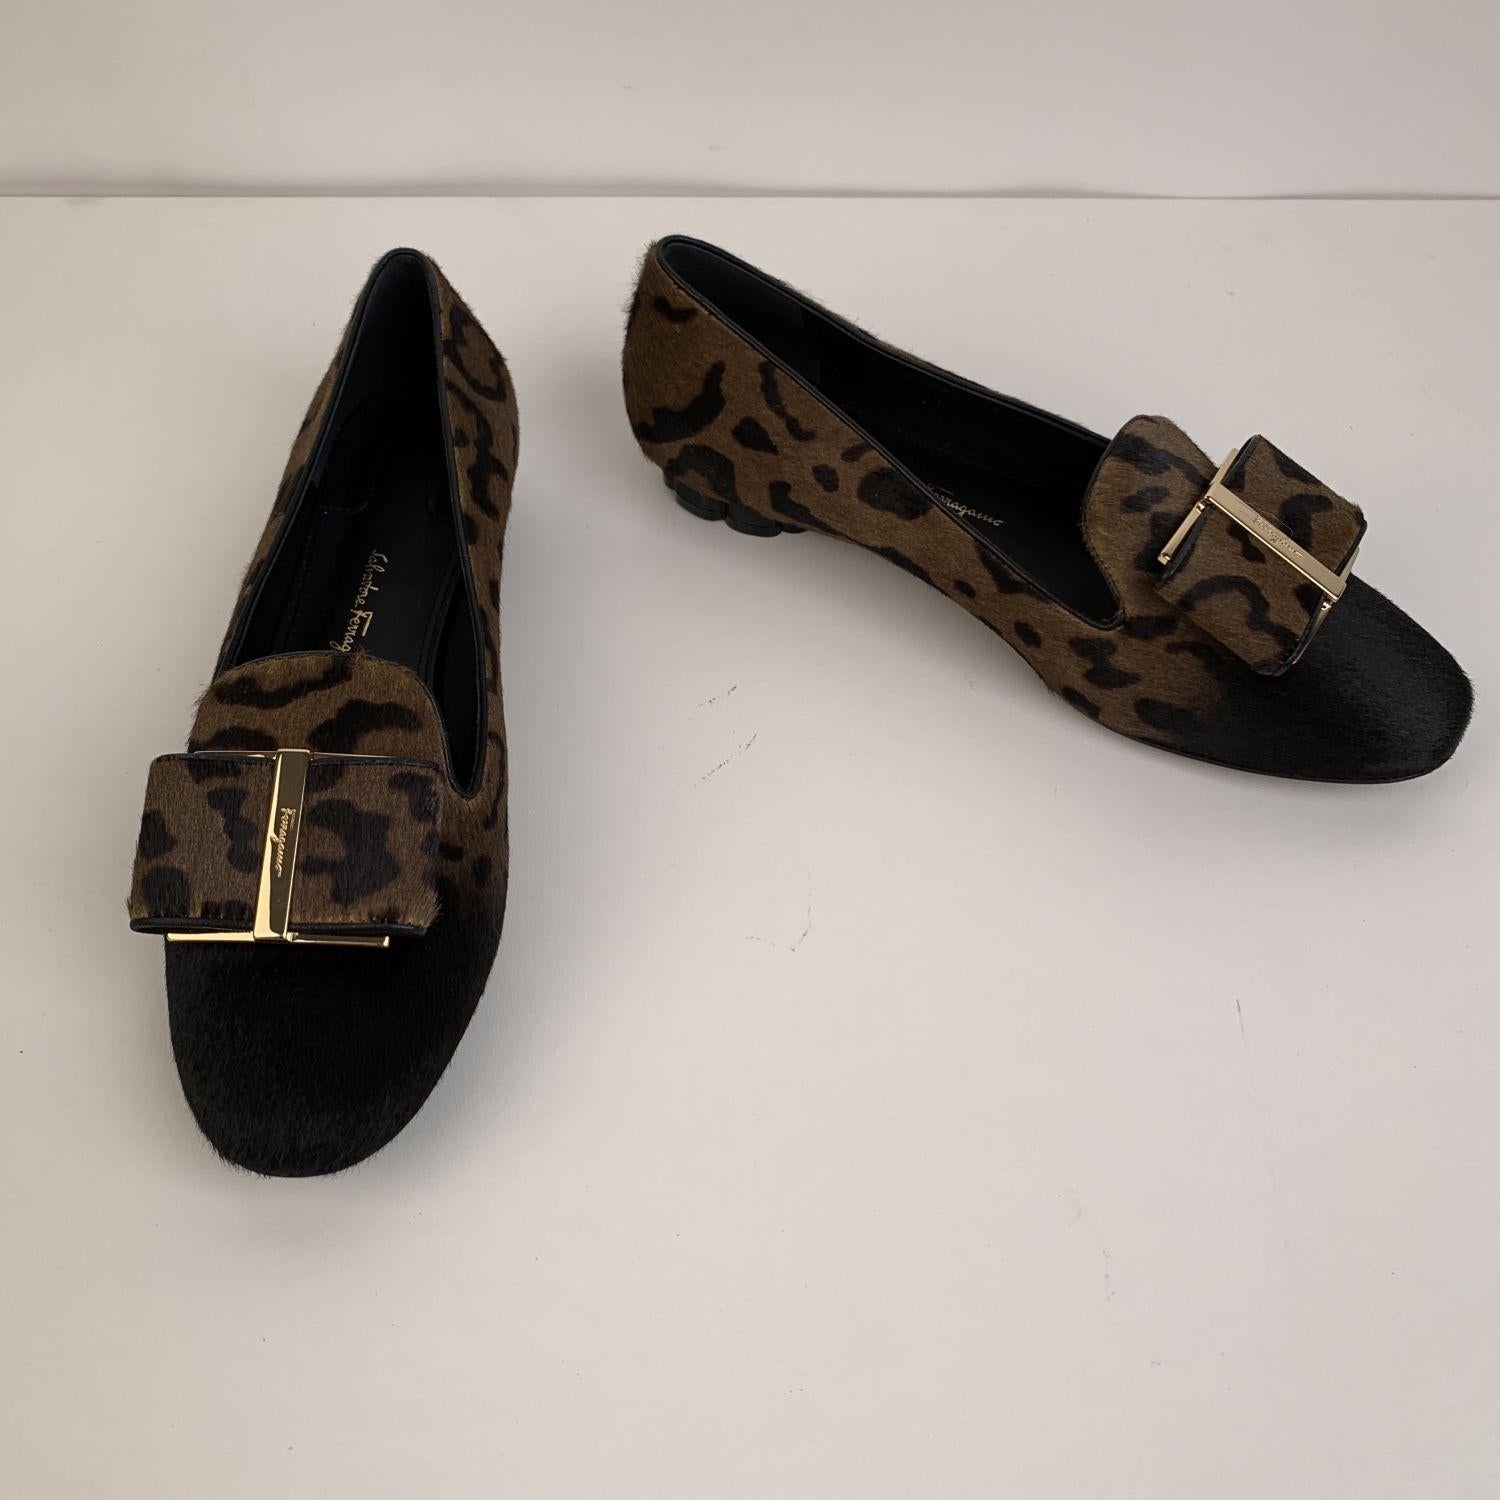 Beautiful Salvatore Ferragamo Leopard ballet flat. Crafted in leopard pony hair upper, they feature a round toe, slip-one design, Vara-bow detailing with gold metal accents on the toes and block flower-shaped heel (height: 1cm). Leather sole. Made